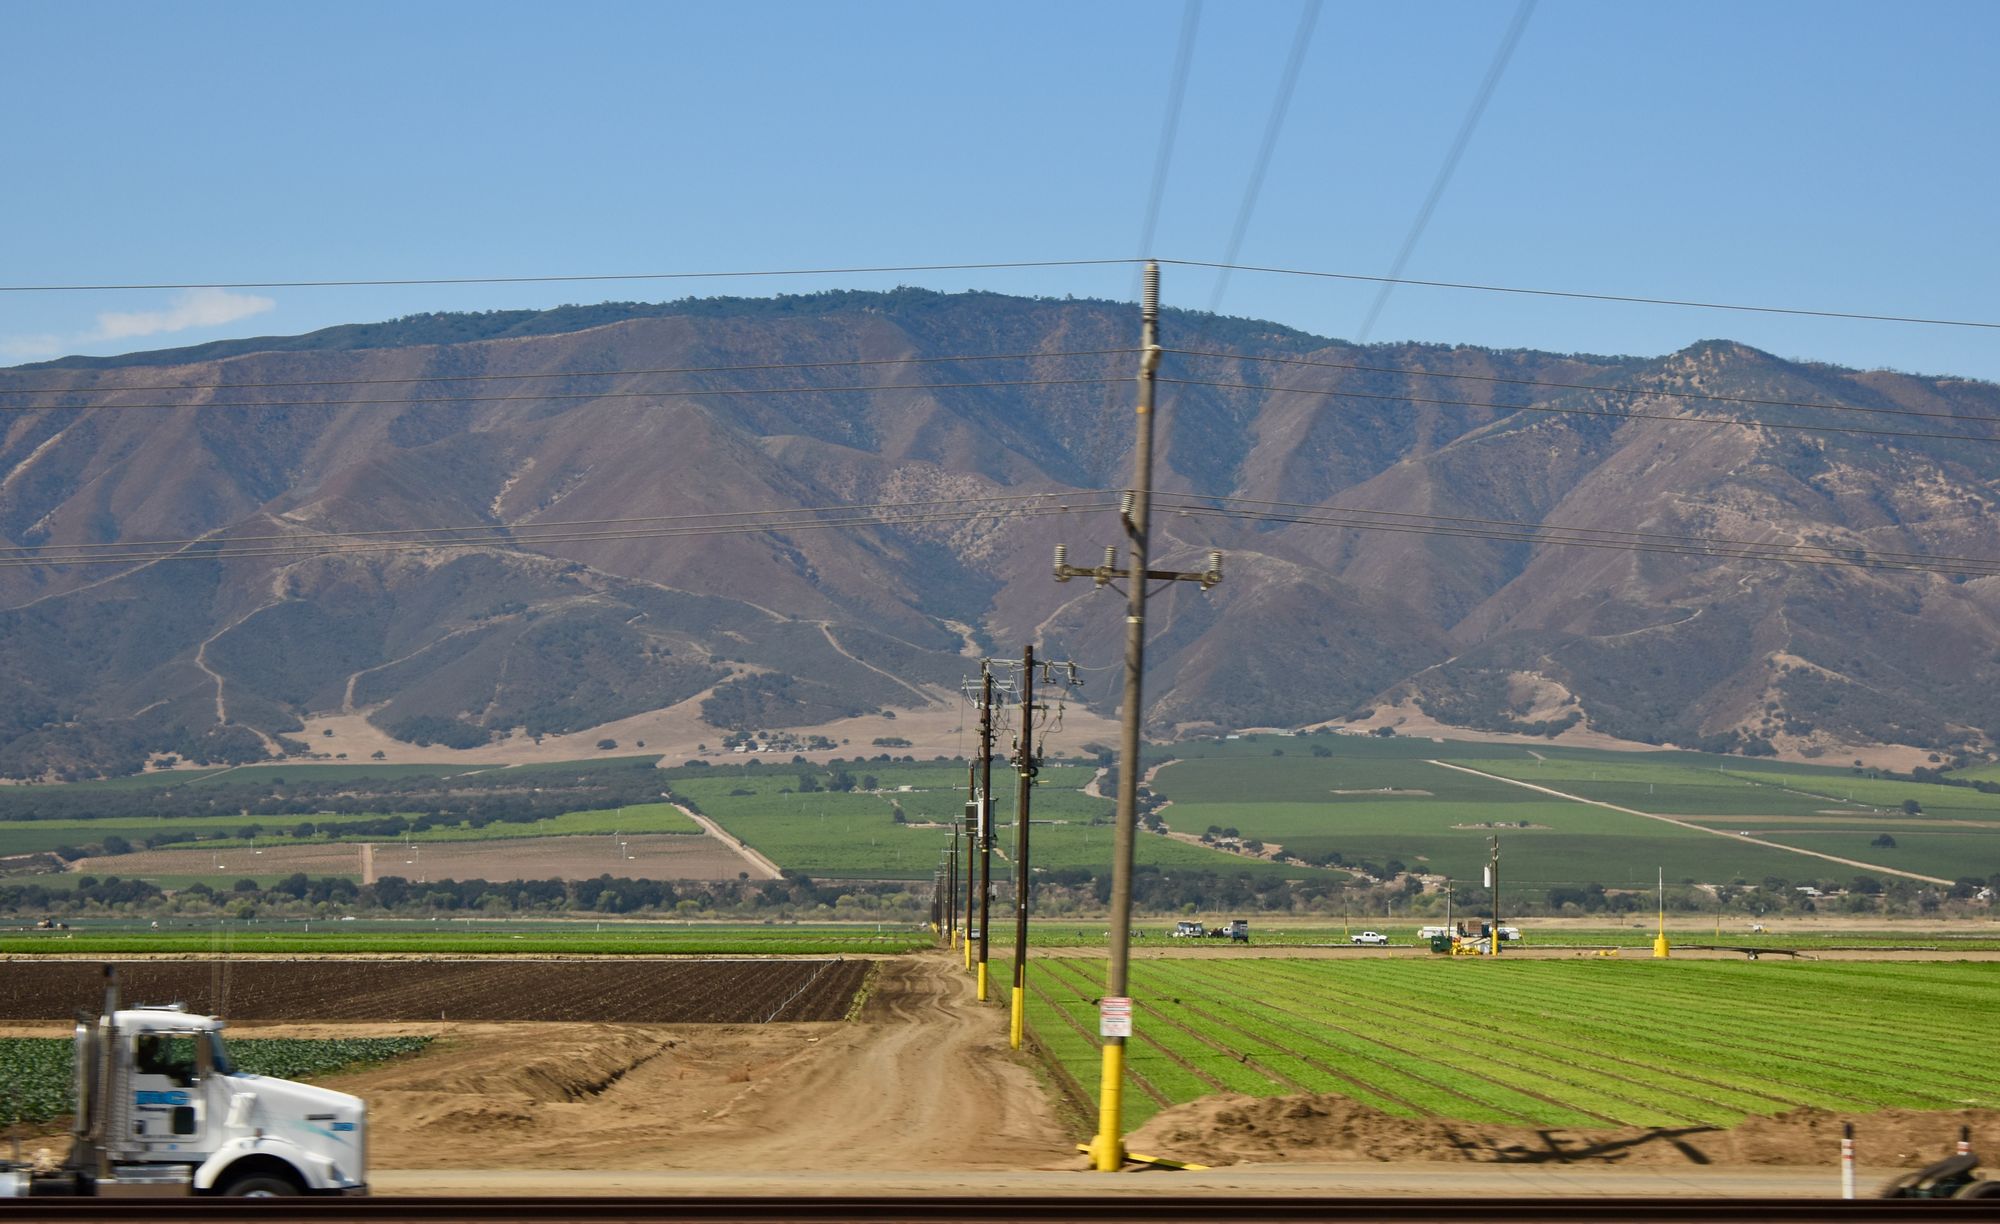 Photo of the fields and landscape of Soledad, California.